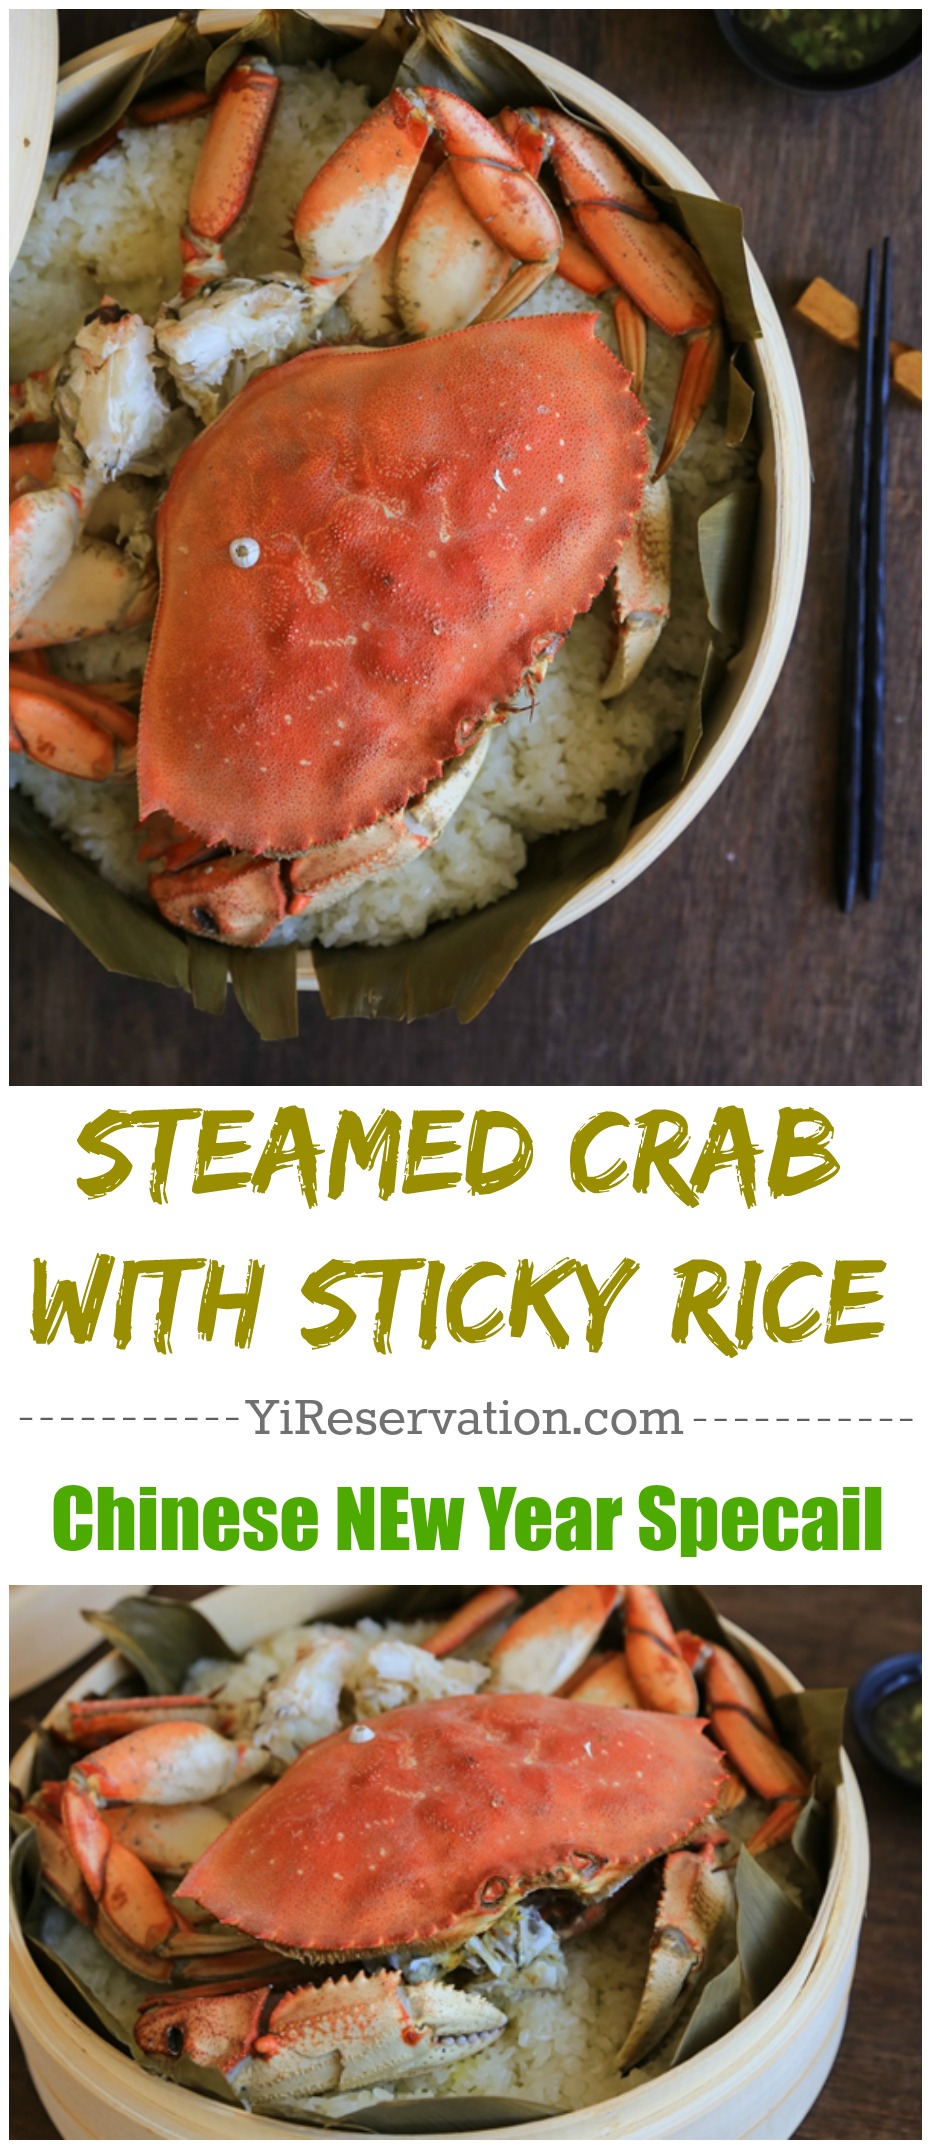 how to make steamed crab with sticky rice in lotus leaves